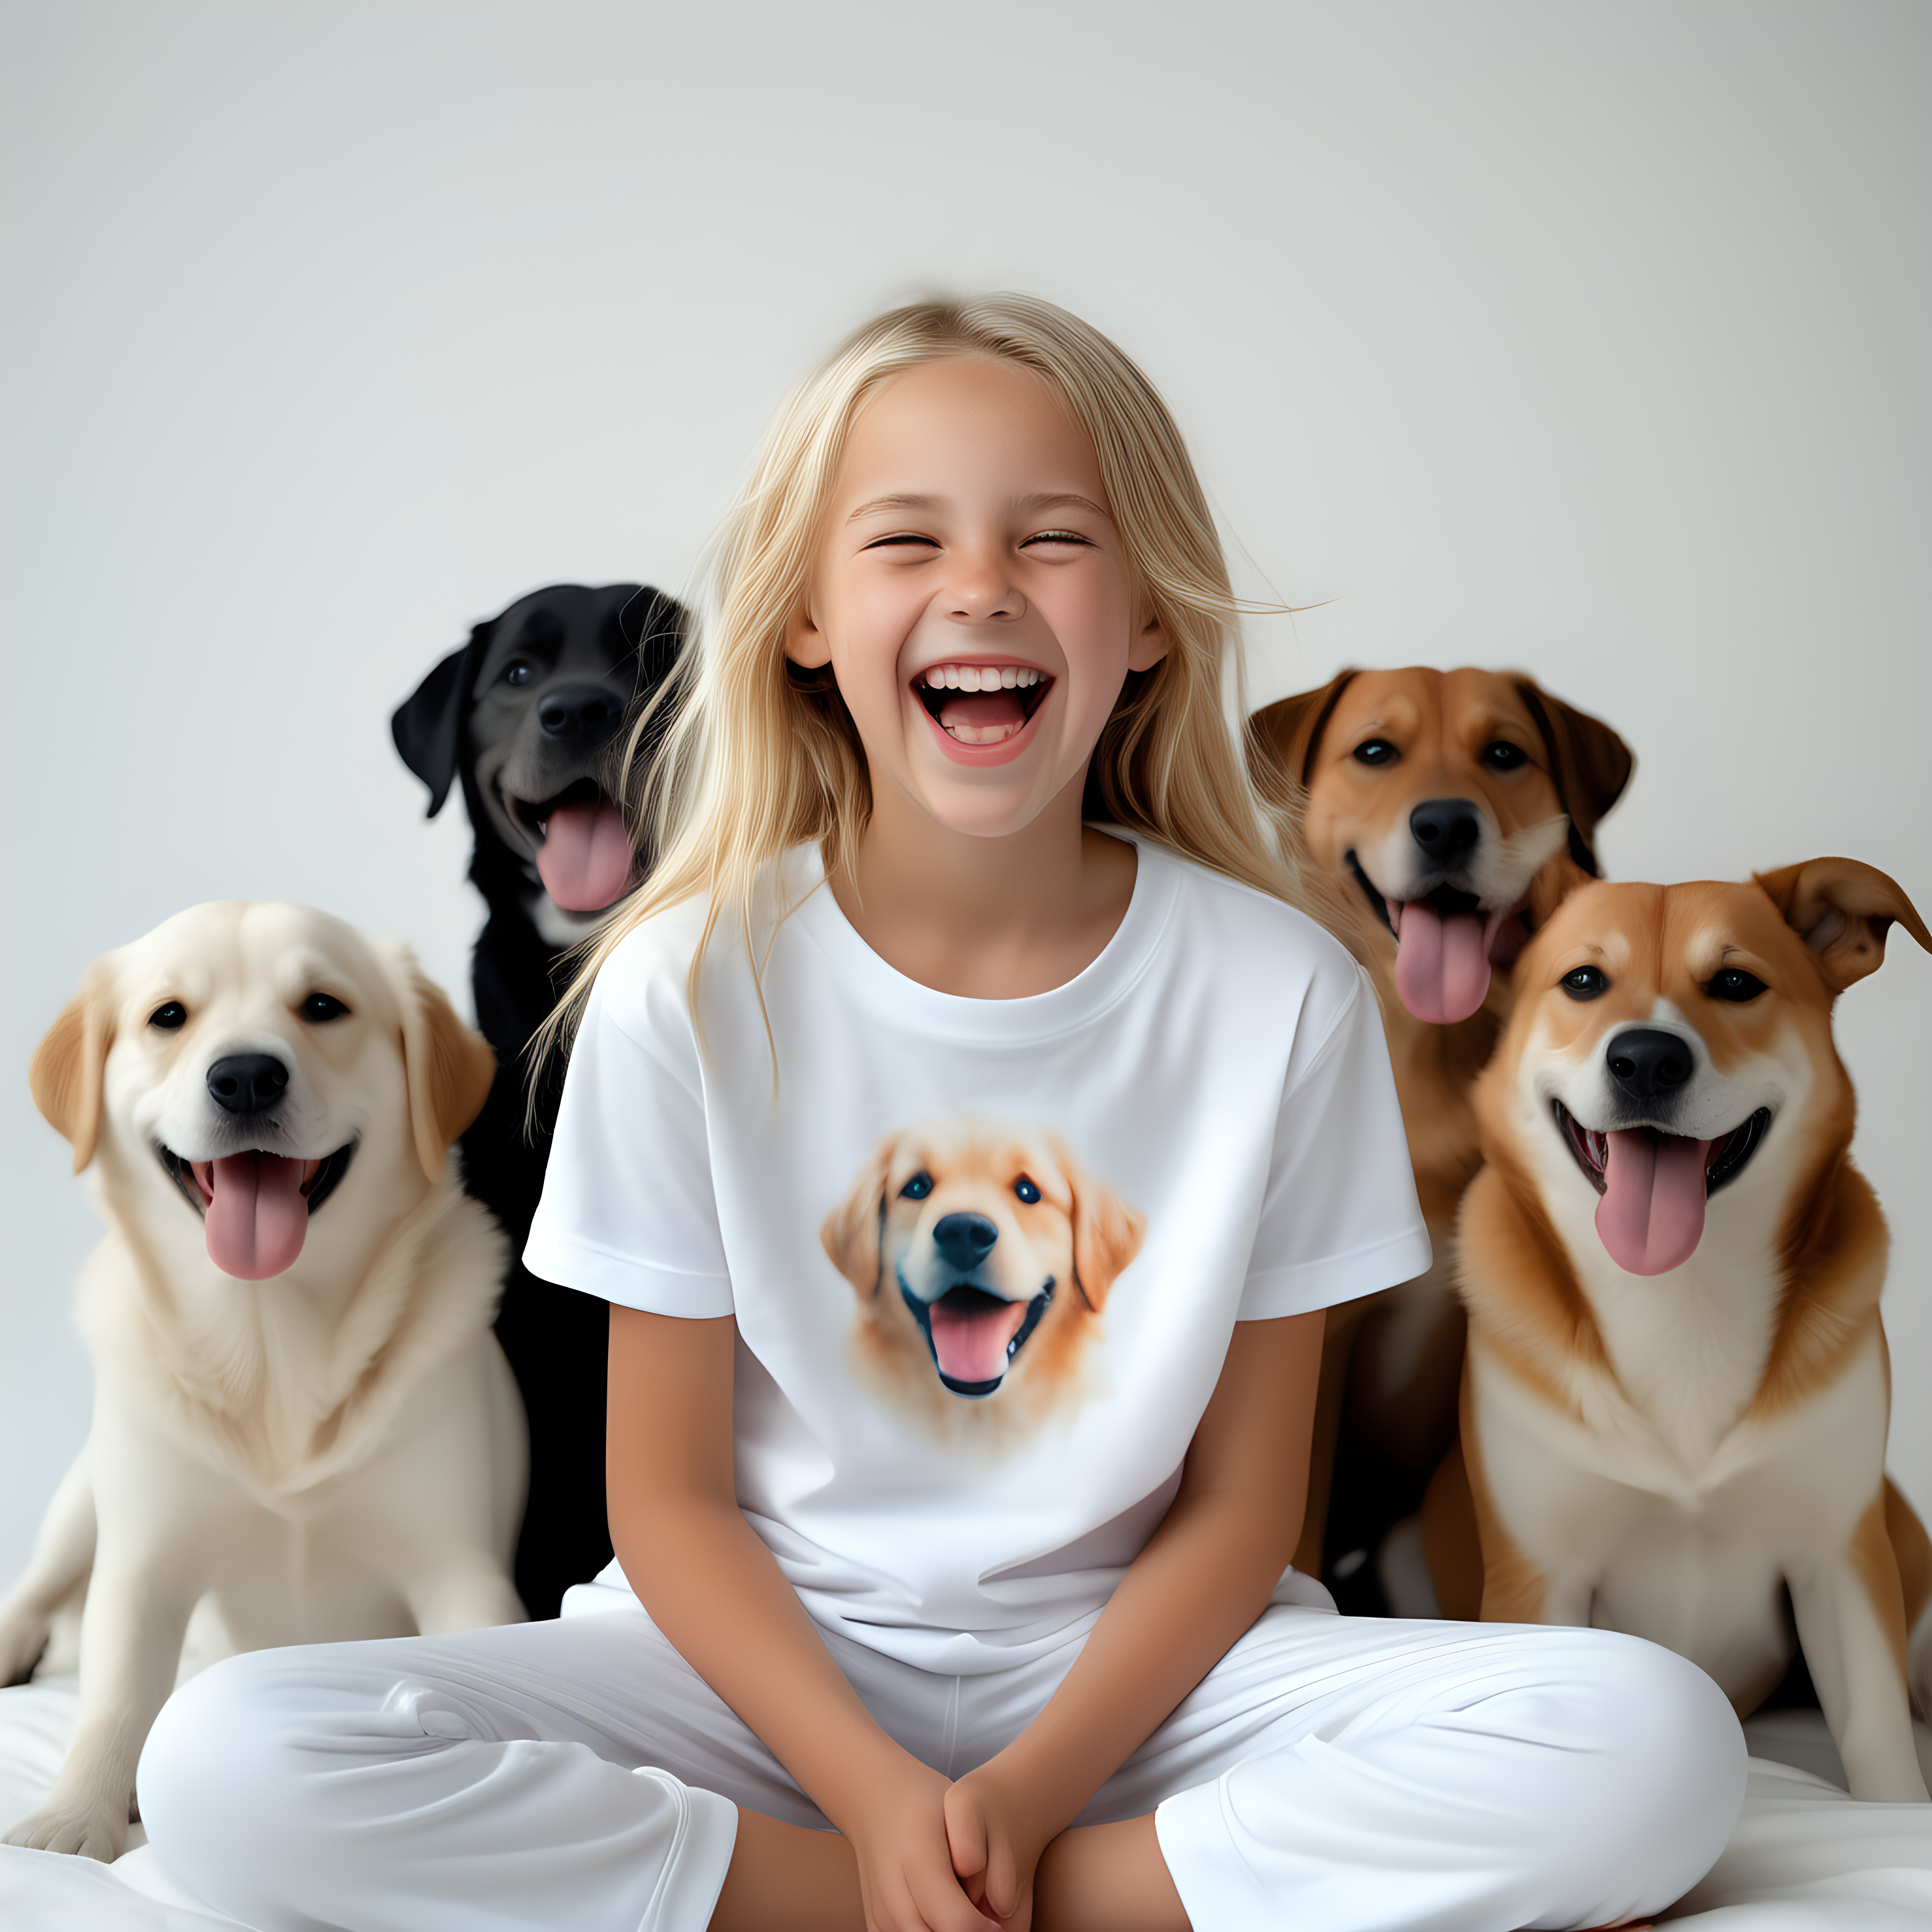 “Perfect Facial Features photo of a blonde lauging 10 year old girl sitting surrounded by dogs, in  white cotton tshirt pyjama (no print, long  tight cuff sleeves, loose long pants) , no background, hyper realistic, ideal face template, HD, happy, Fujifilm X-T3, 1/1250sec at f/2.8, ISO 160, 84mm”